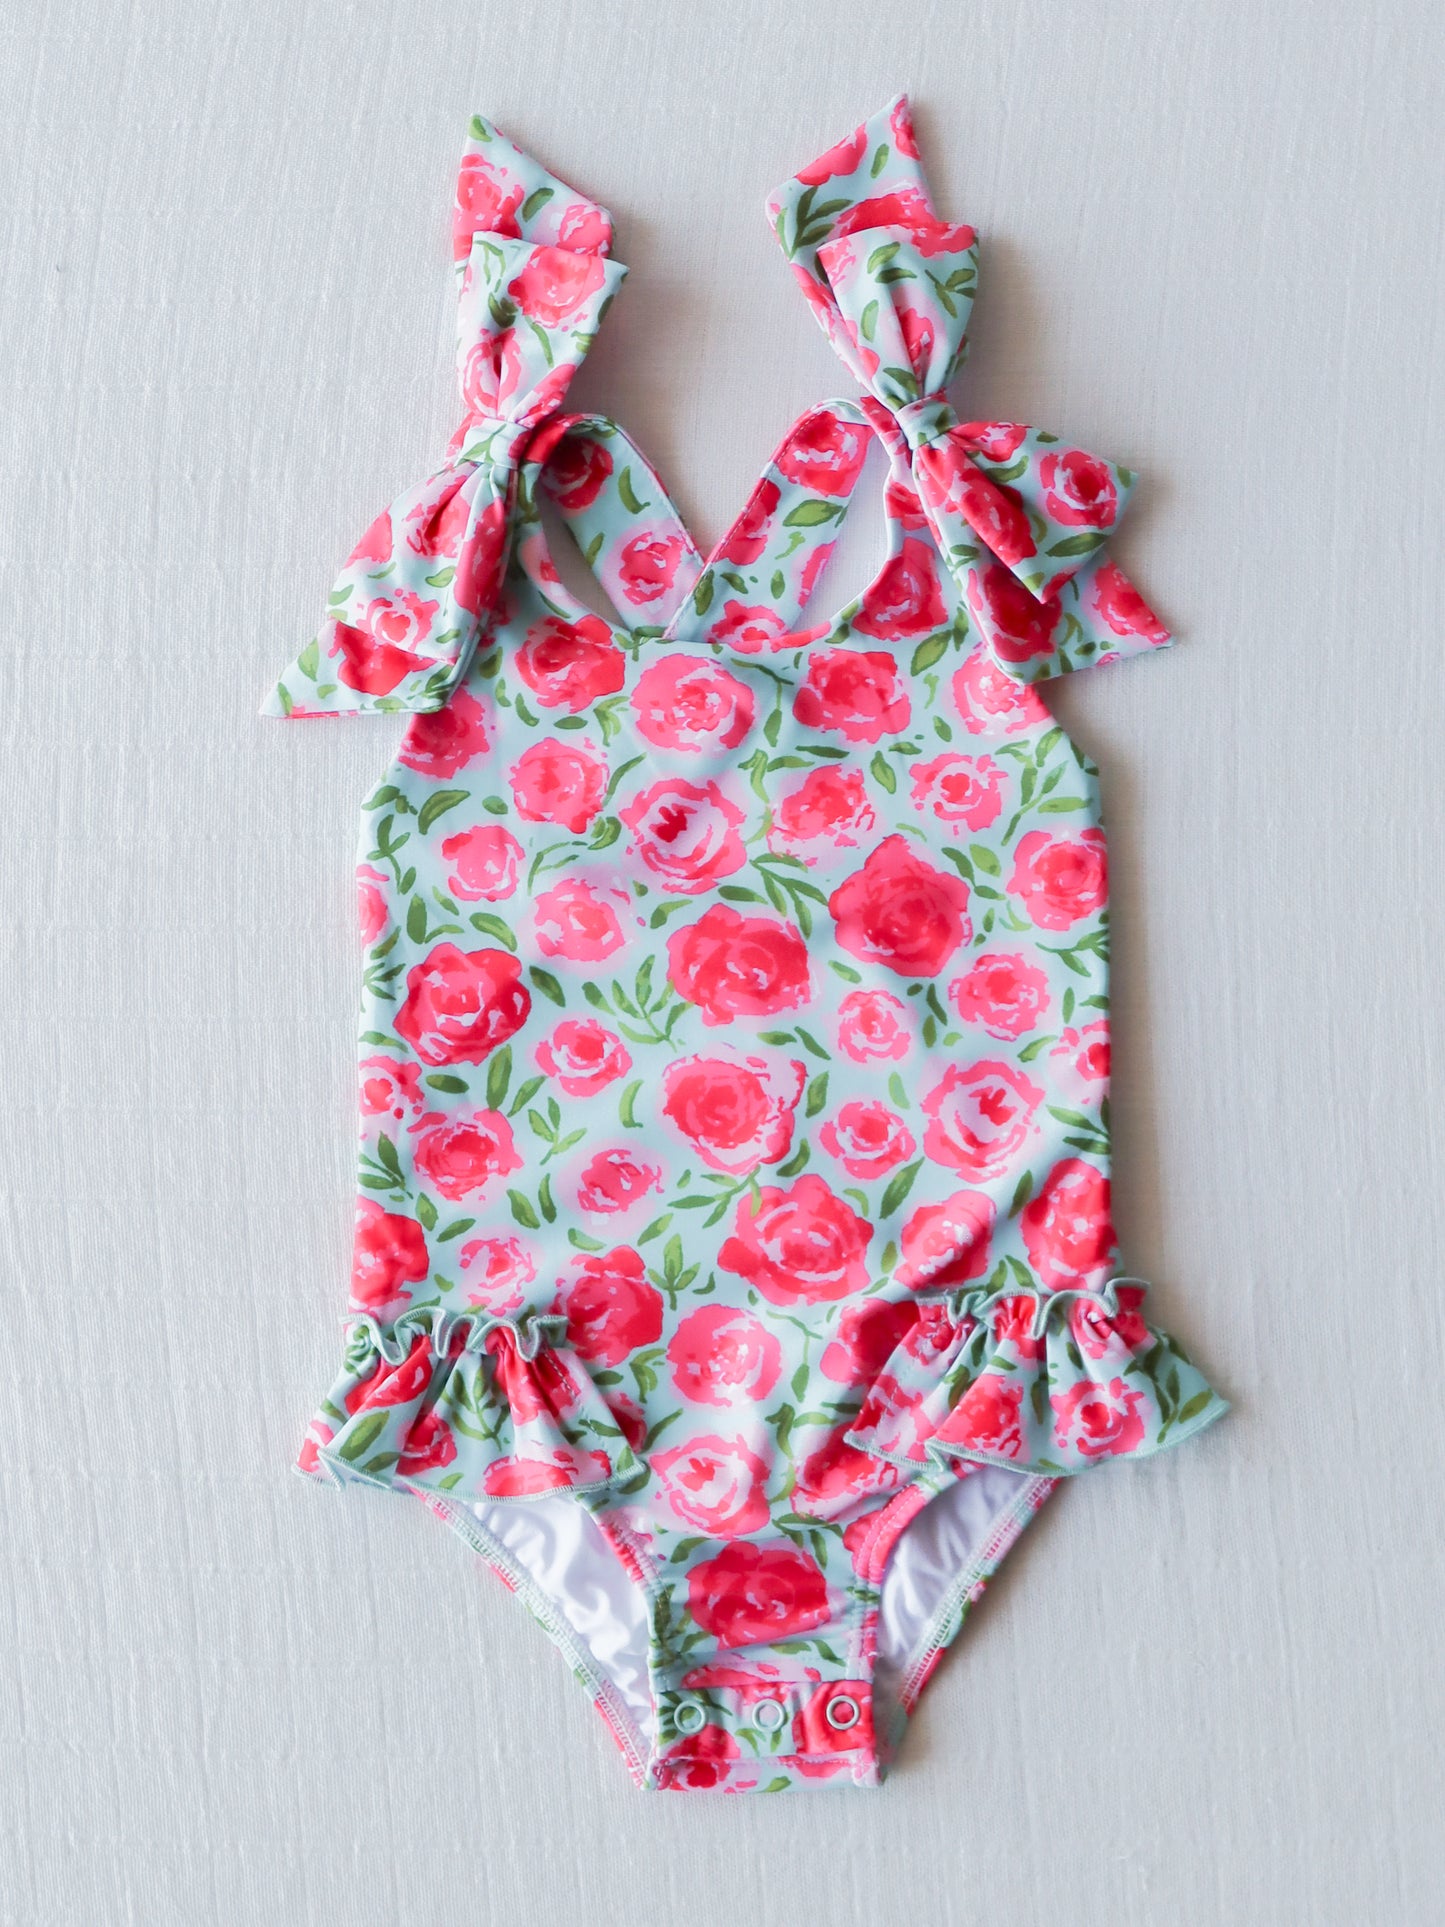 Melanie One Piece - Covered in Roses on Aqua